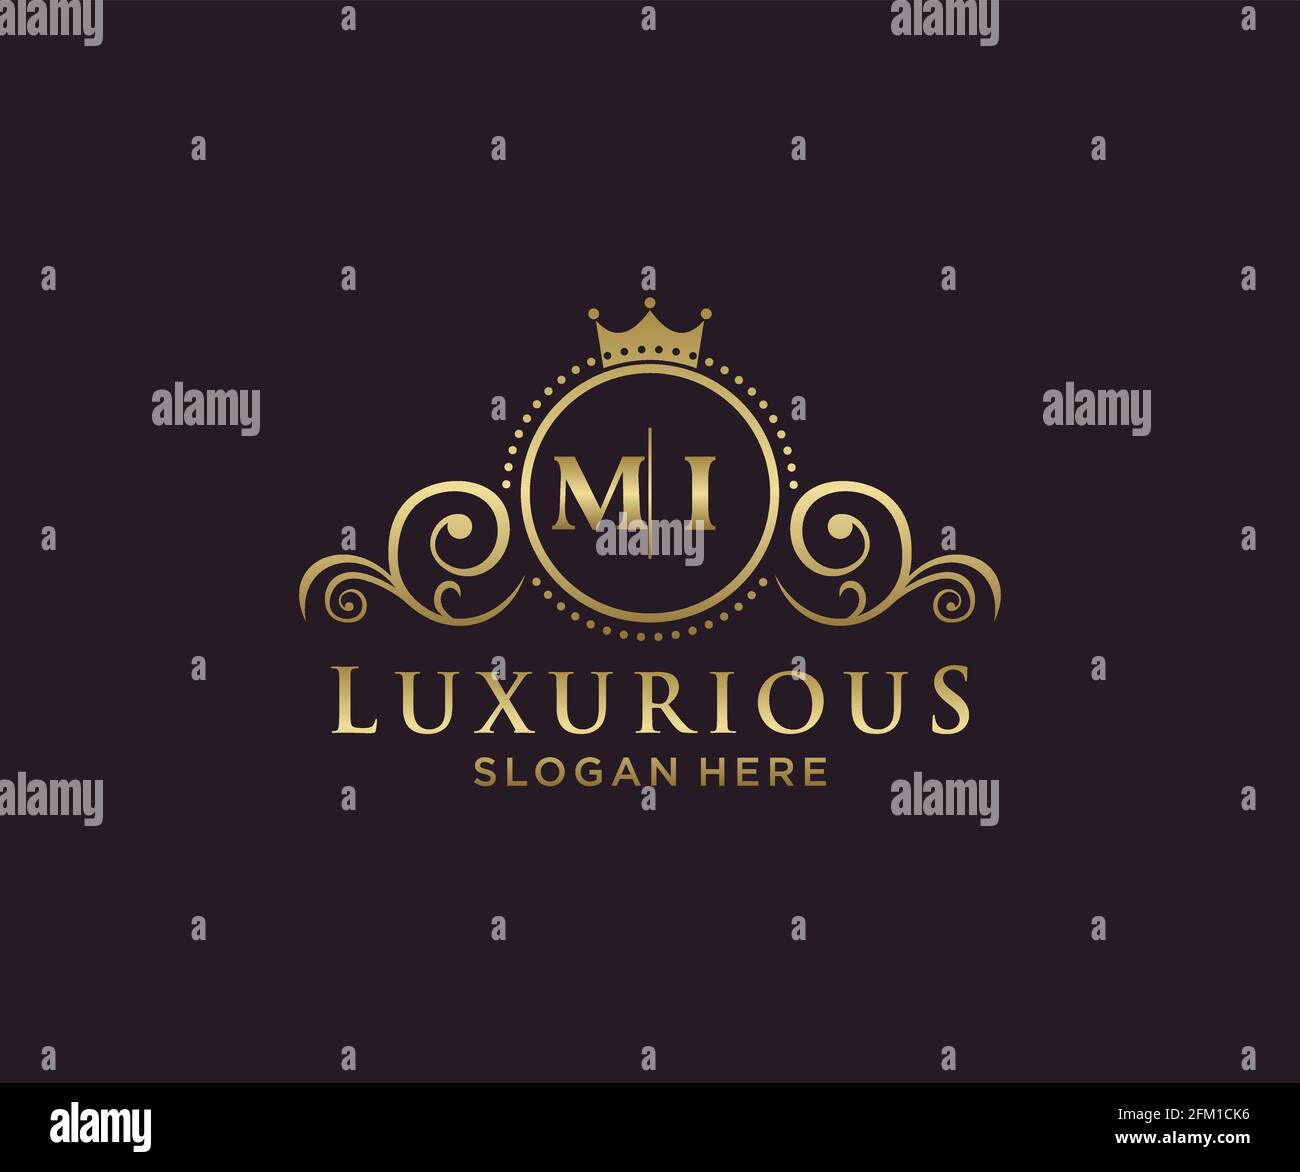 MI Letter Royal Luxury Logo template in vector art for Restaurant, Royalty, Boutique, Cafe, Hotel, Heraldic, Jewelry, Fashion and other vector illustr Stock Vector